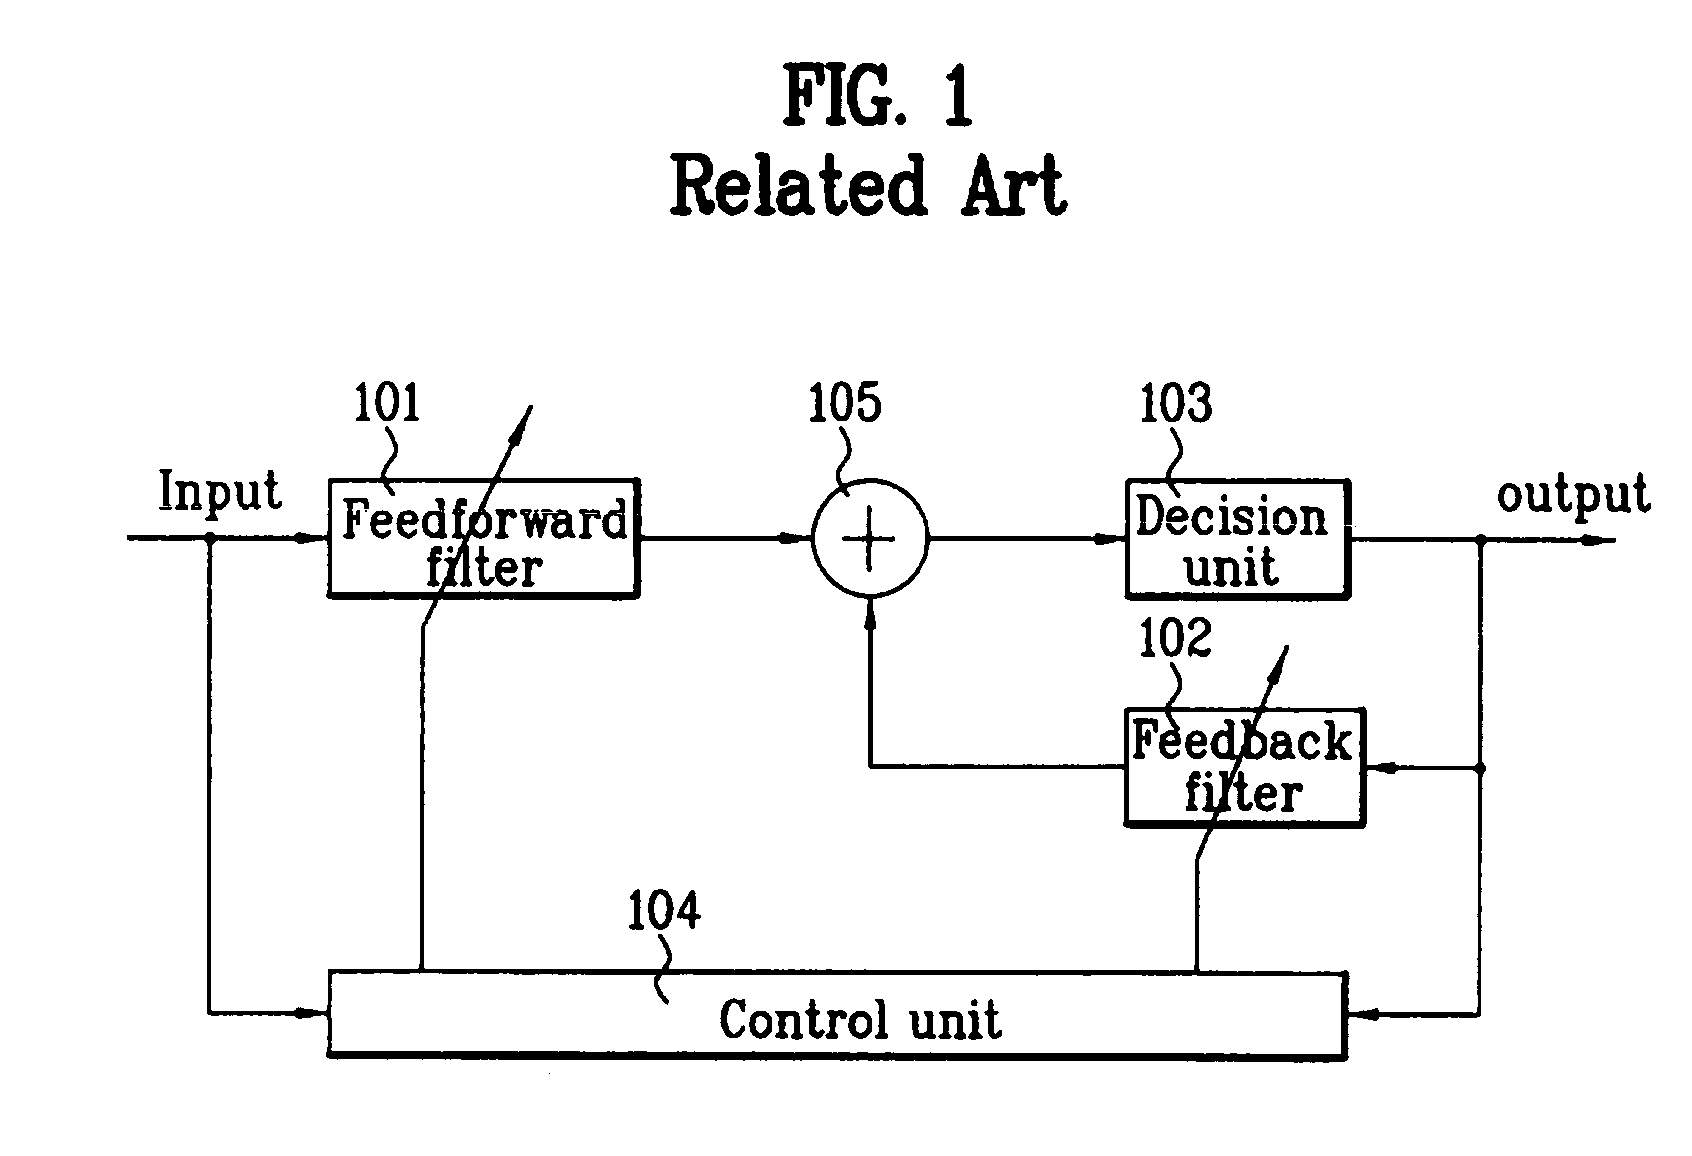 Channel equalizer and digital television receiver using the same